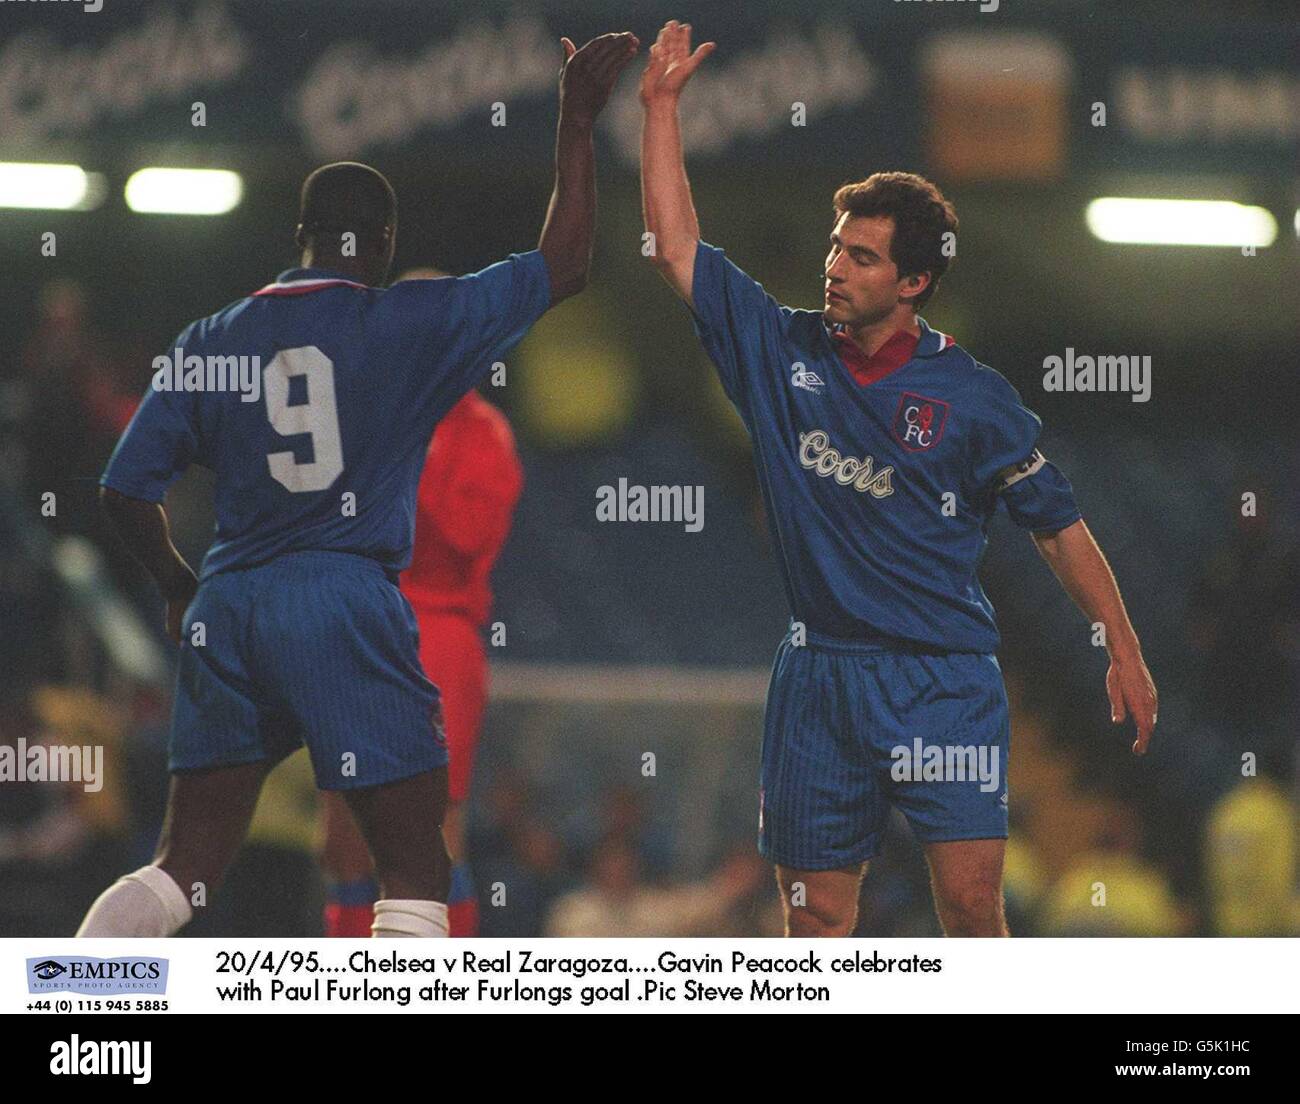 Image result for chelsea 1993"